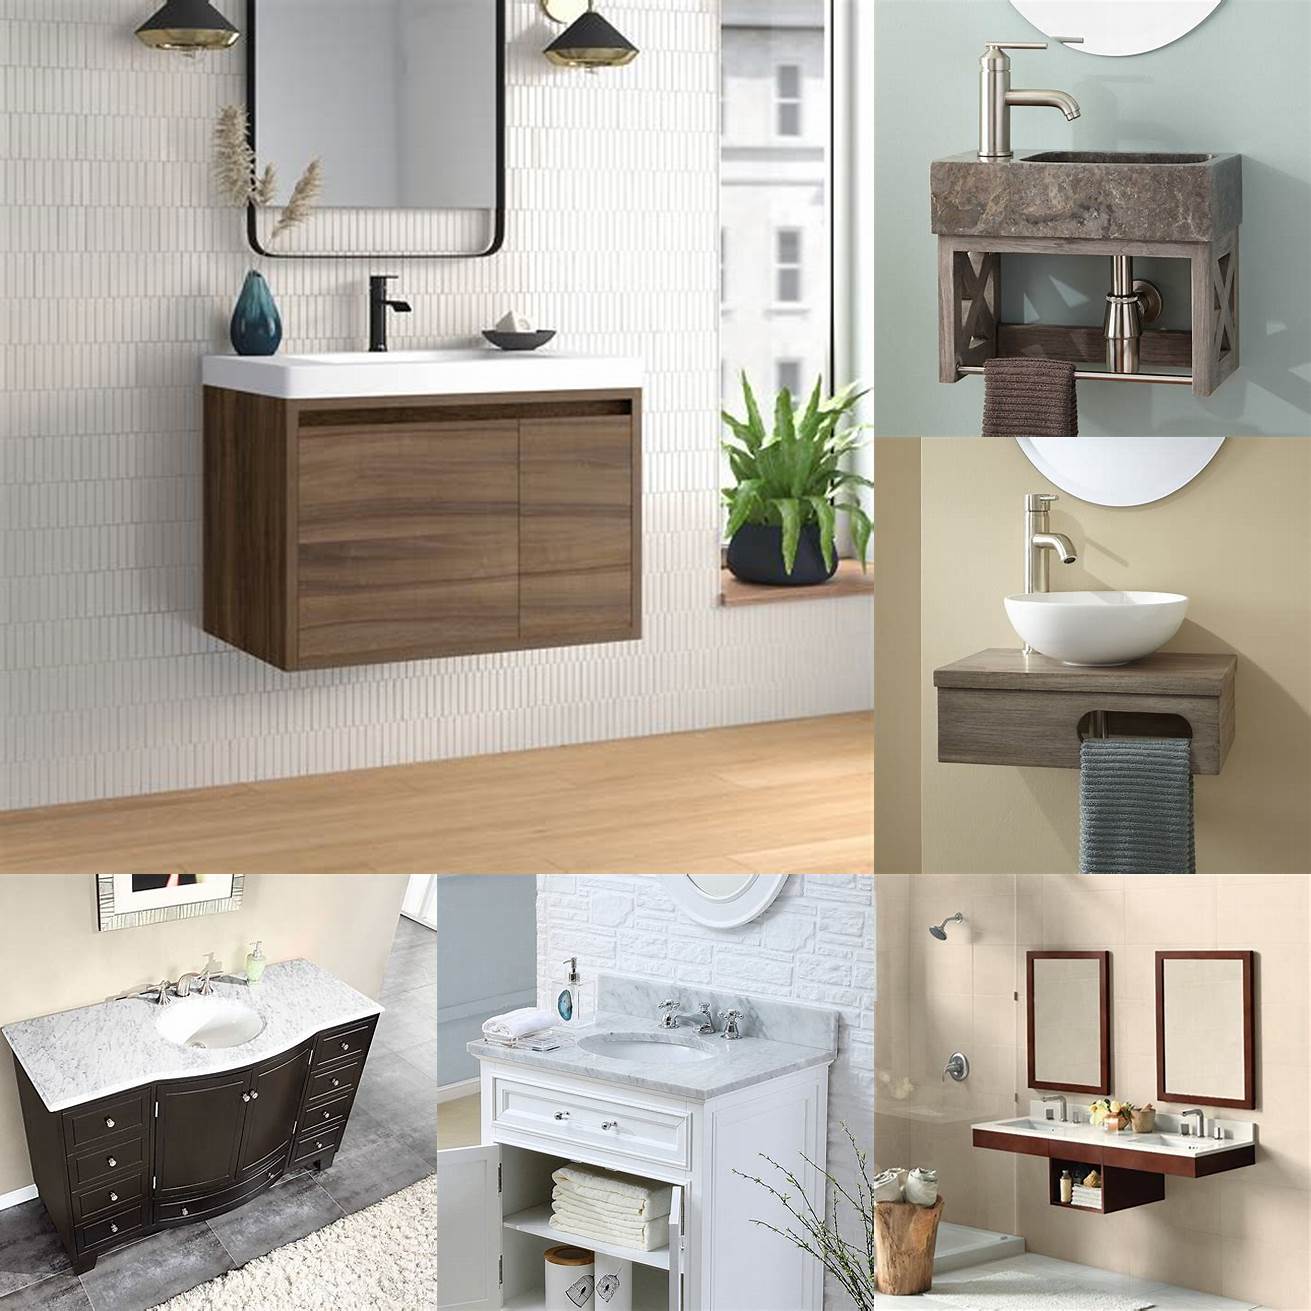 1 Wall-mounted petite vanity with a marble countertop